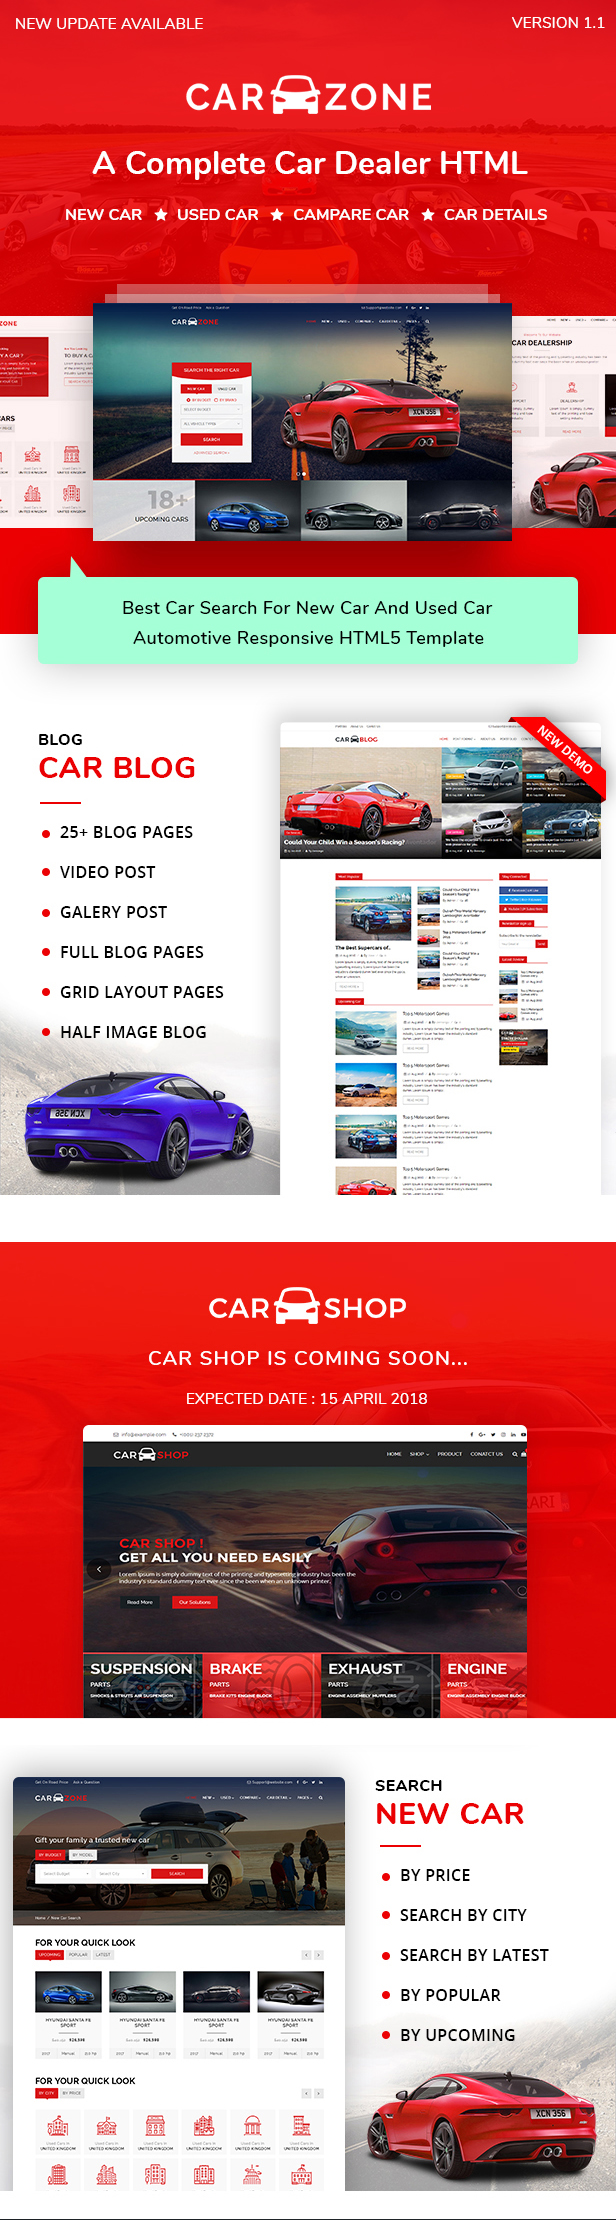 CarZone - A Complete Car Dealer HTML Wire-Frame - 2